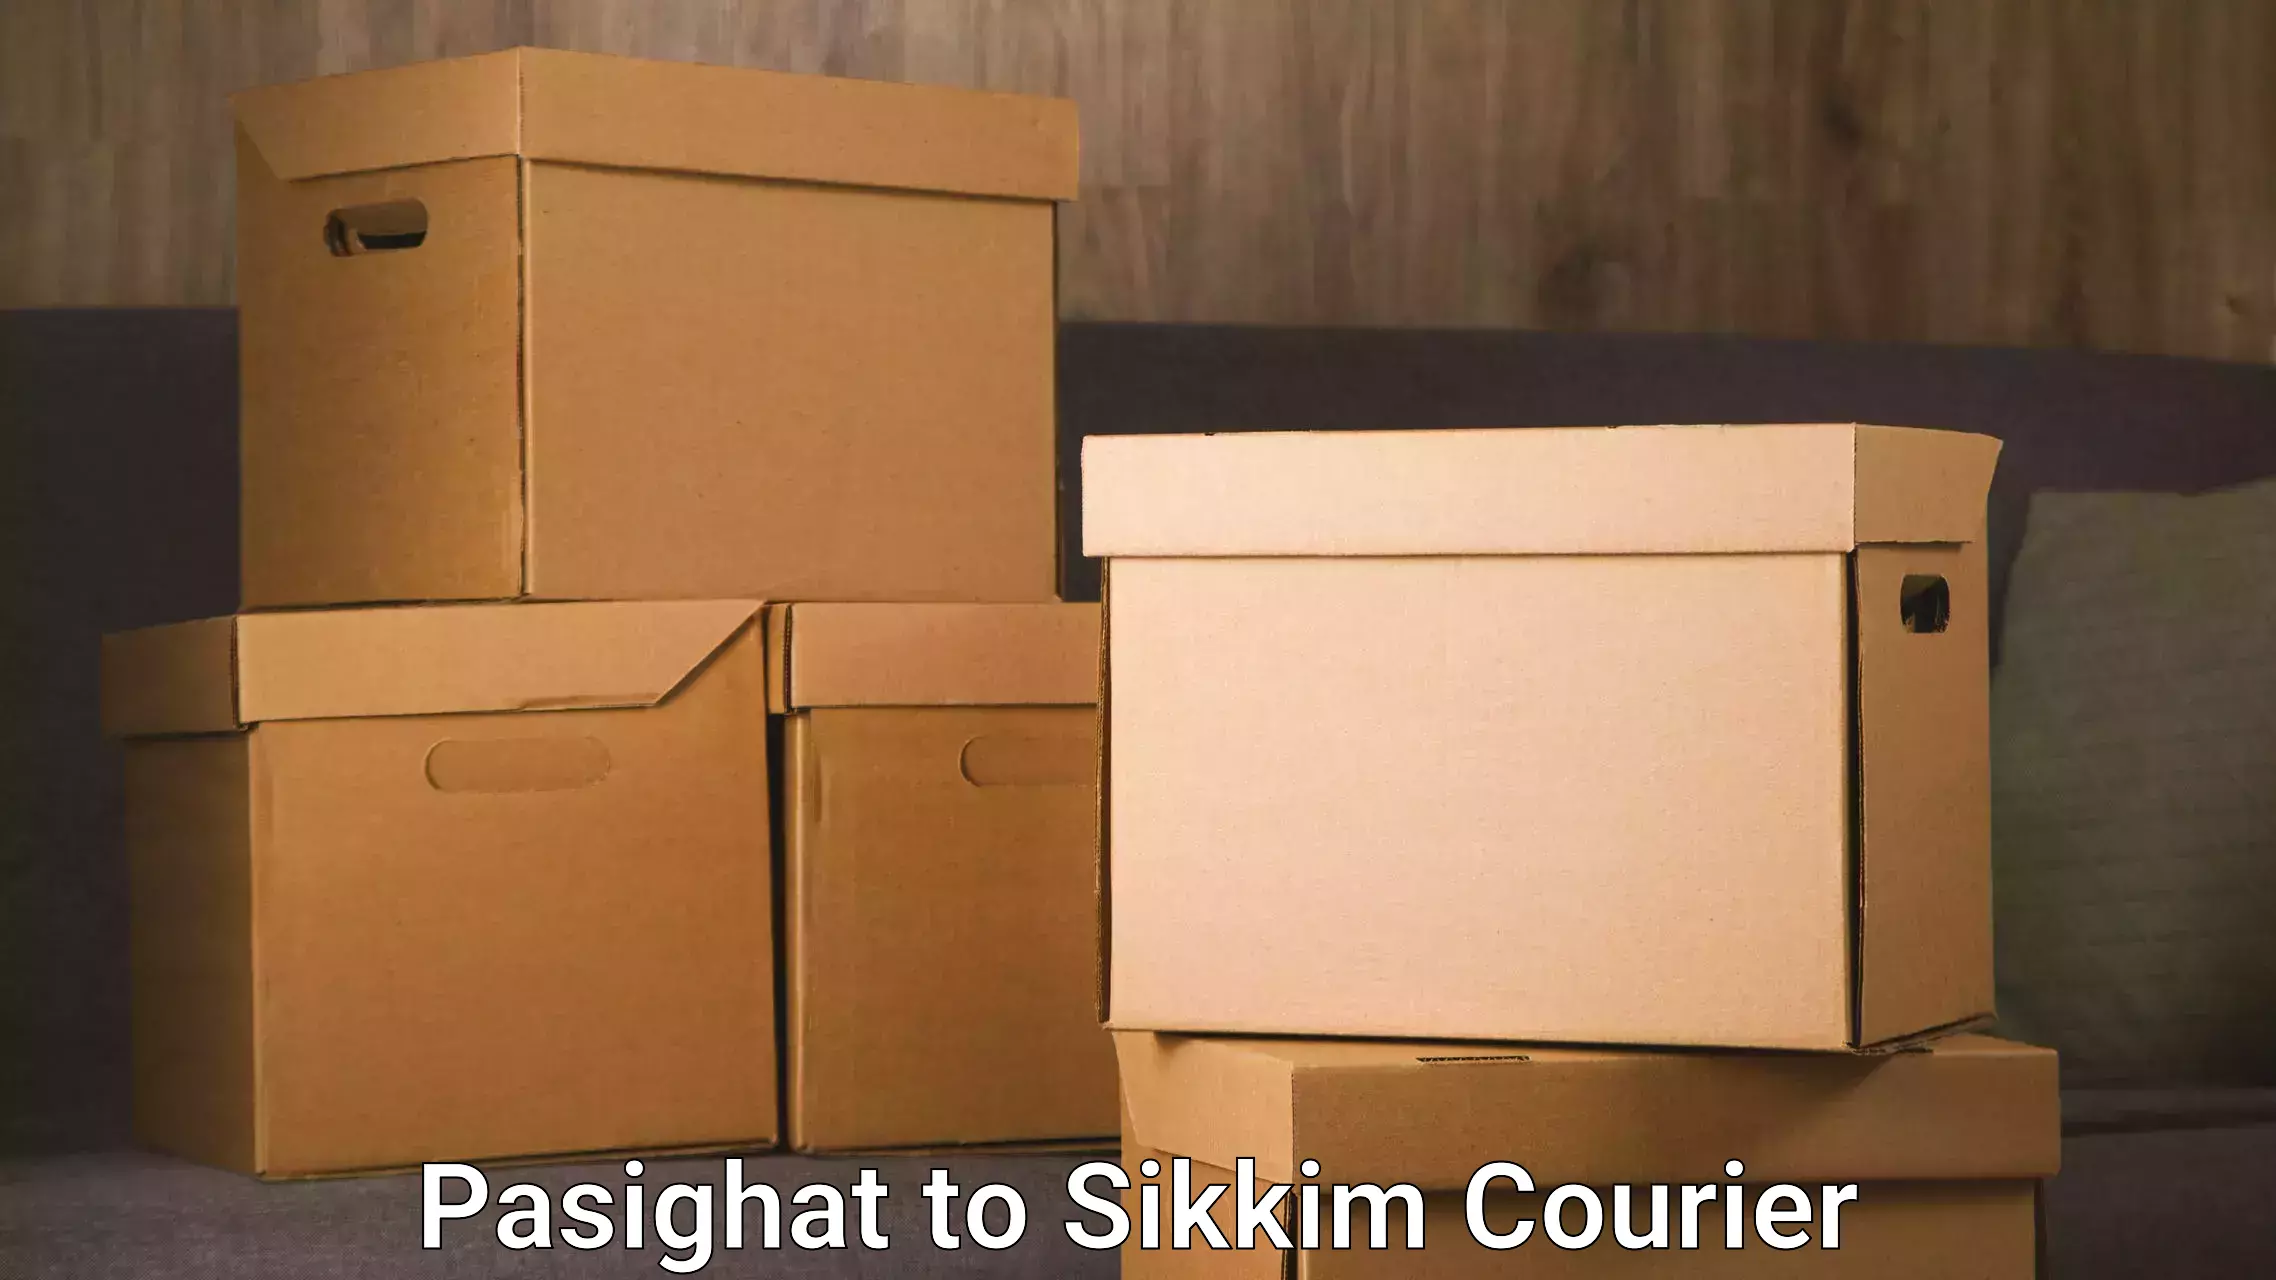 Global logistics network Pasighat to East Sikkim